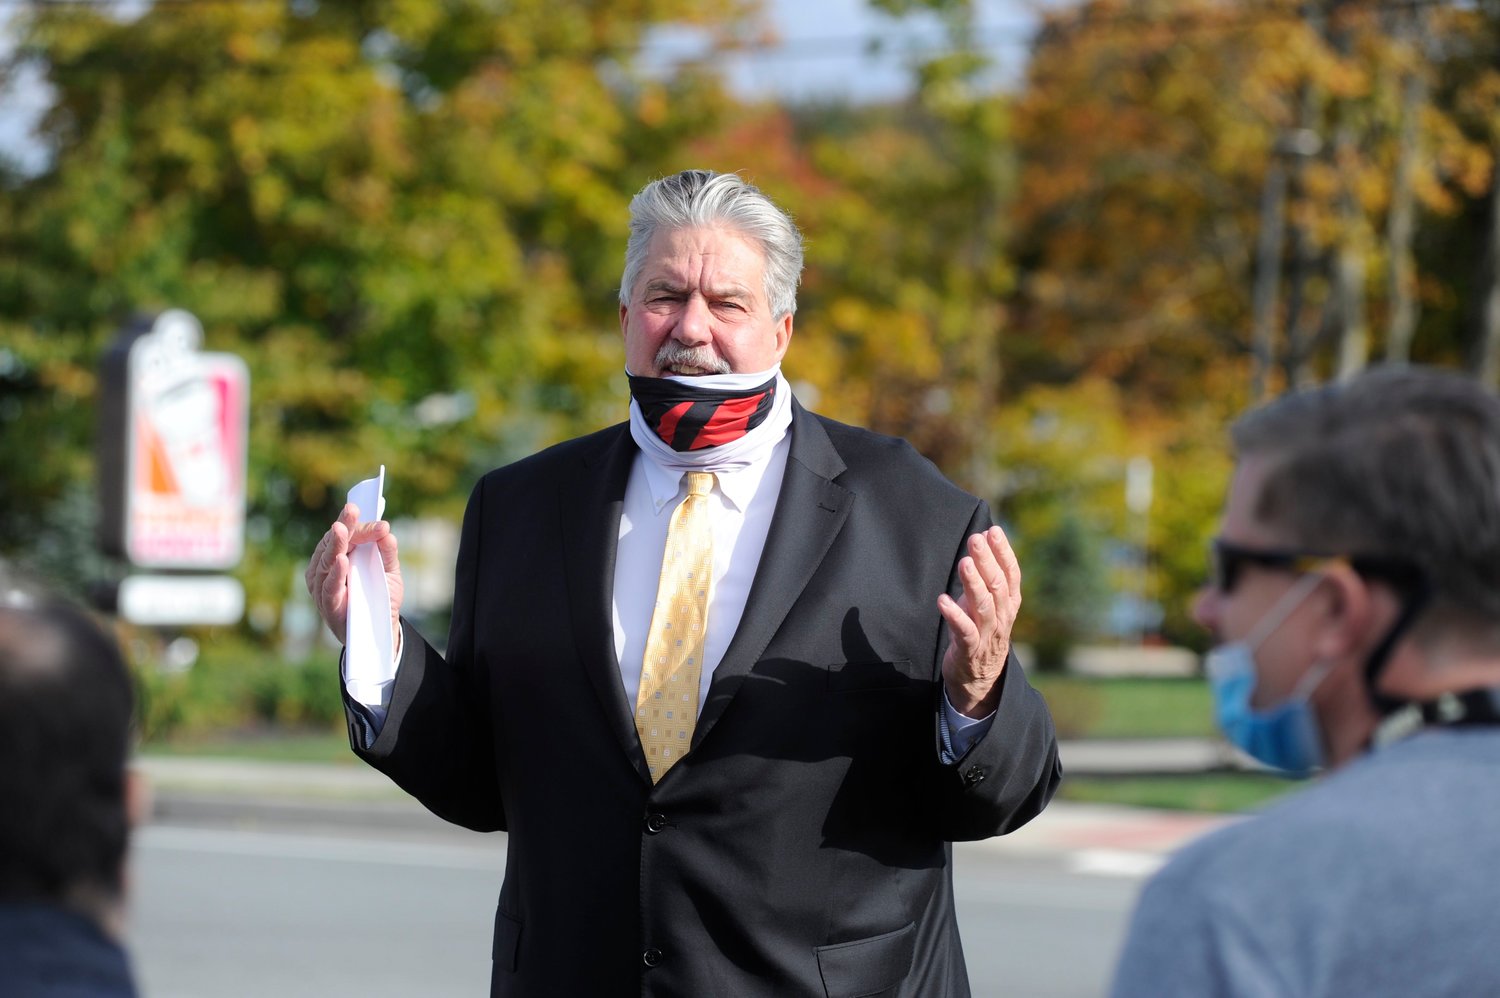 Sullivan County DA candidate Frank LaBuda speaks to the crowd at an October 7 press conference.